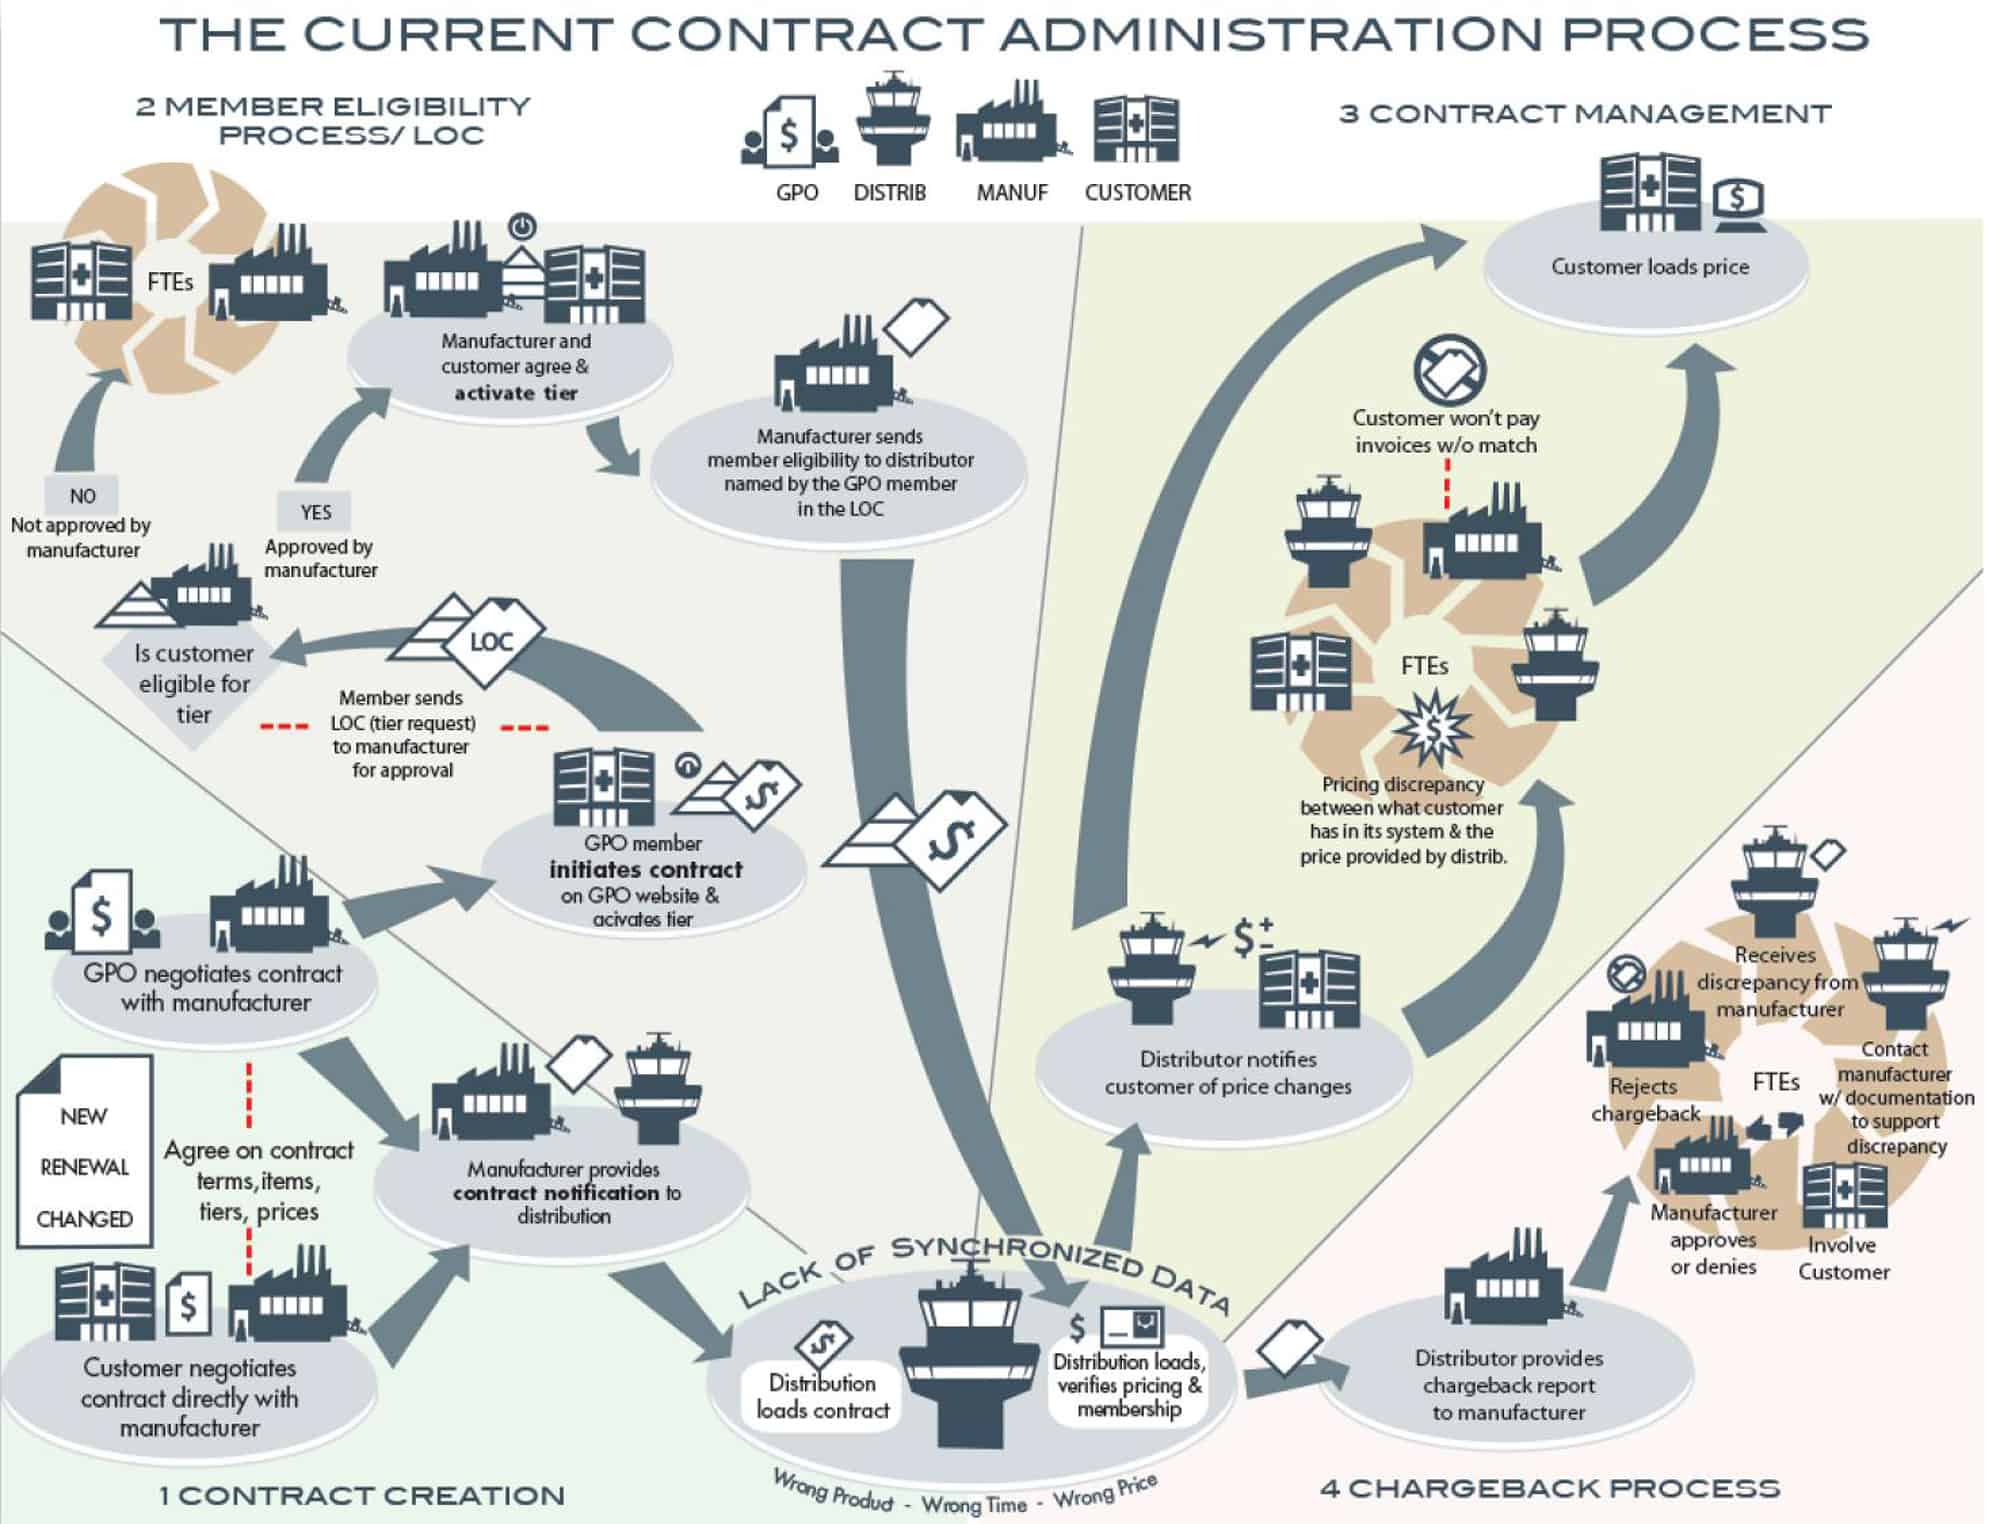 The Current Contract Administration Process